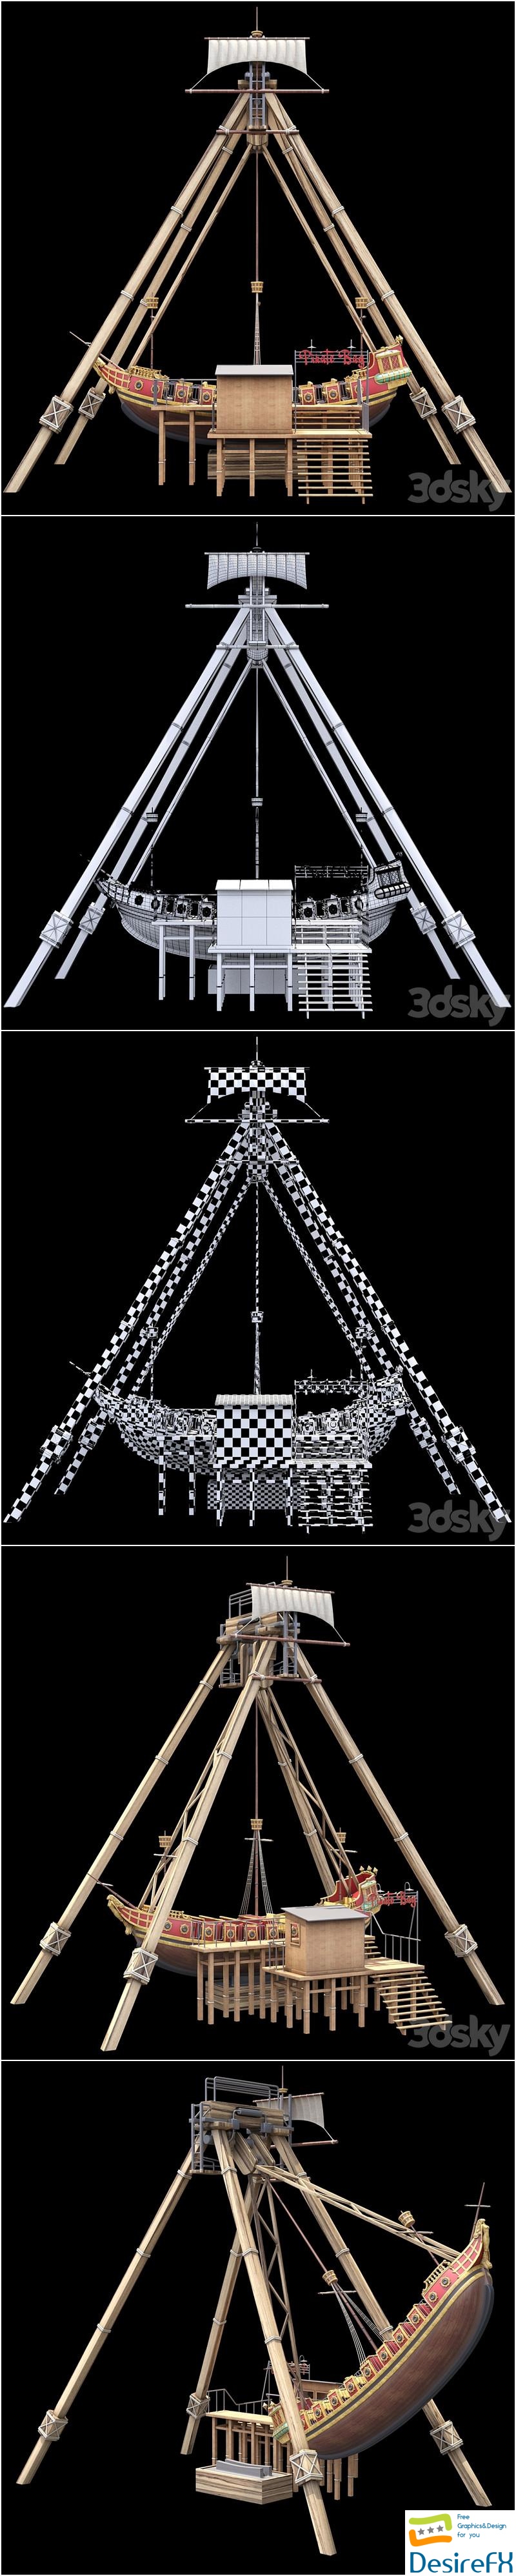 Attraction Pirate ship 3D Model